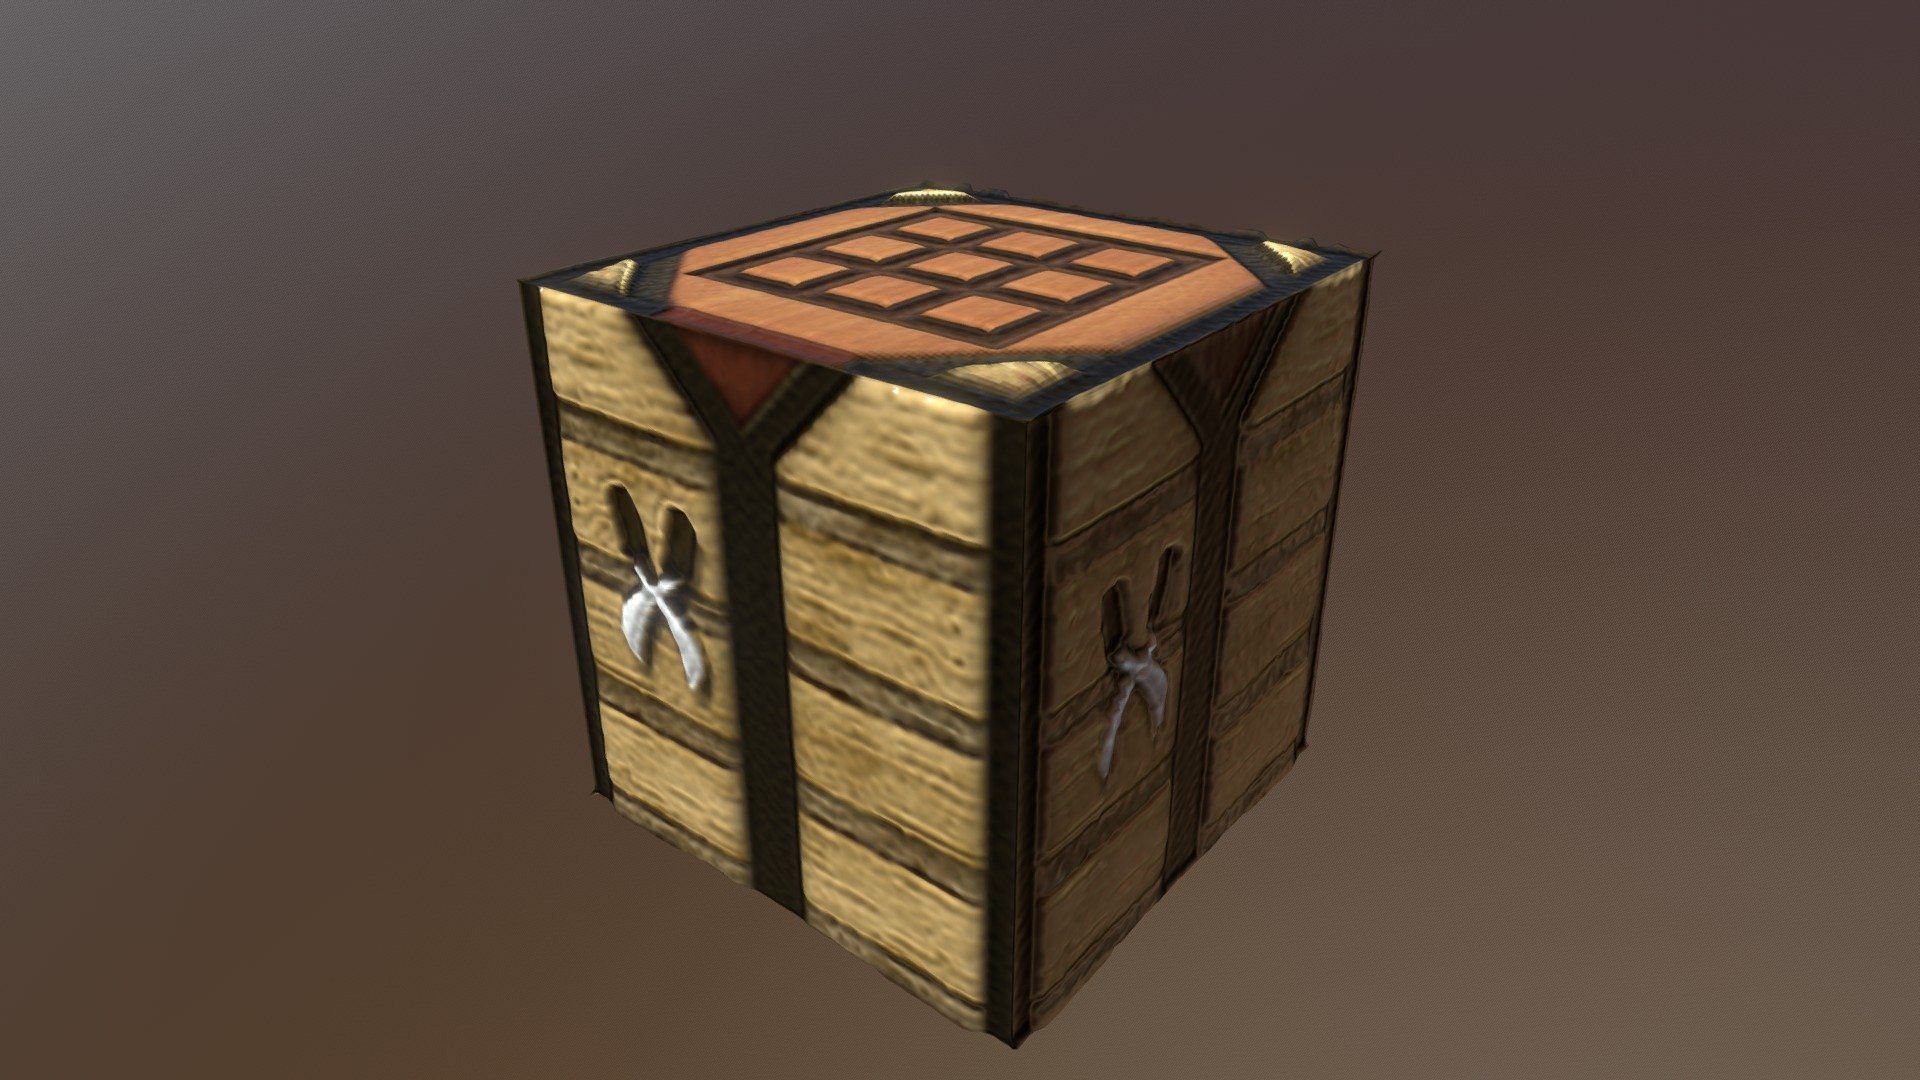 A crafting table in Minecraft (Image via Sketchfab)